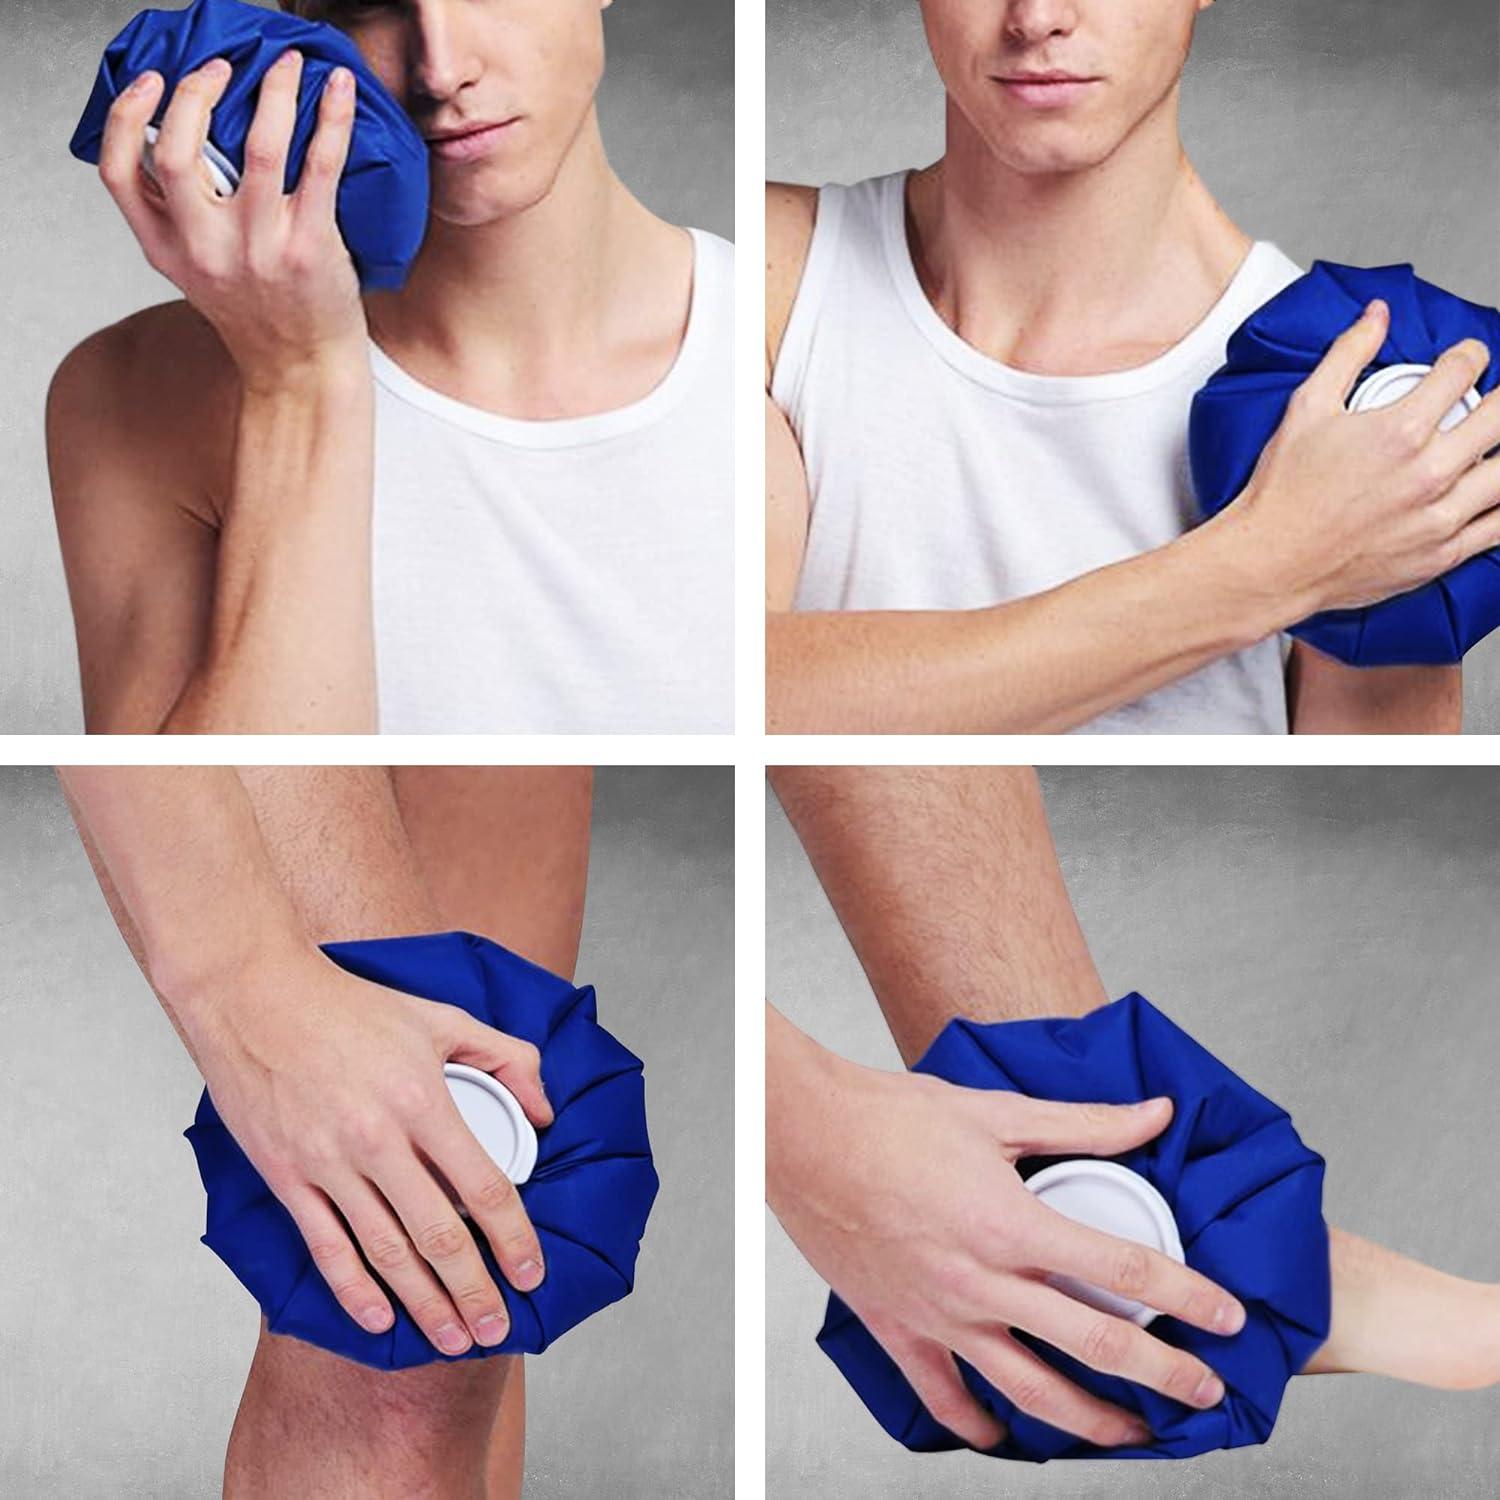 Ice Bag - Large 11in.